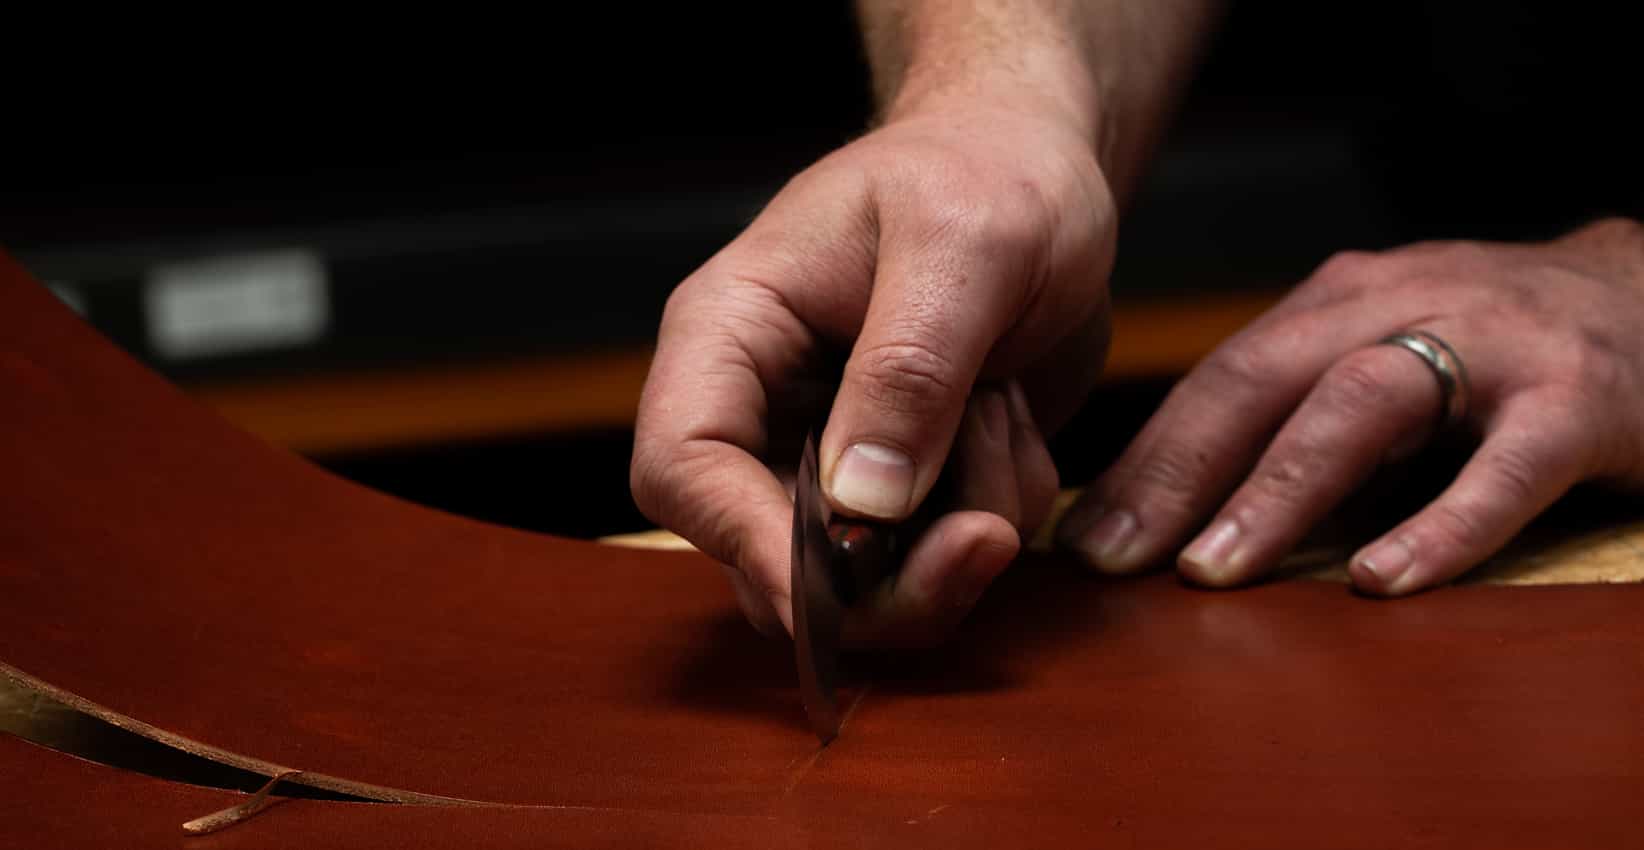 Leather worker cutting leather with Abbey Round Knife